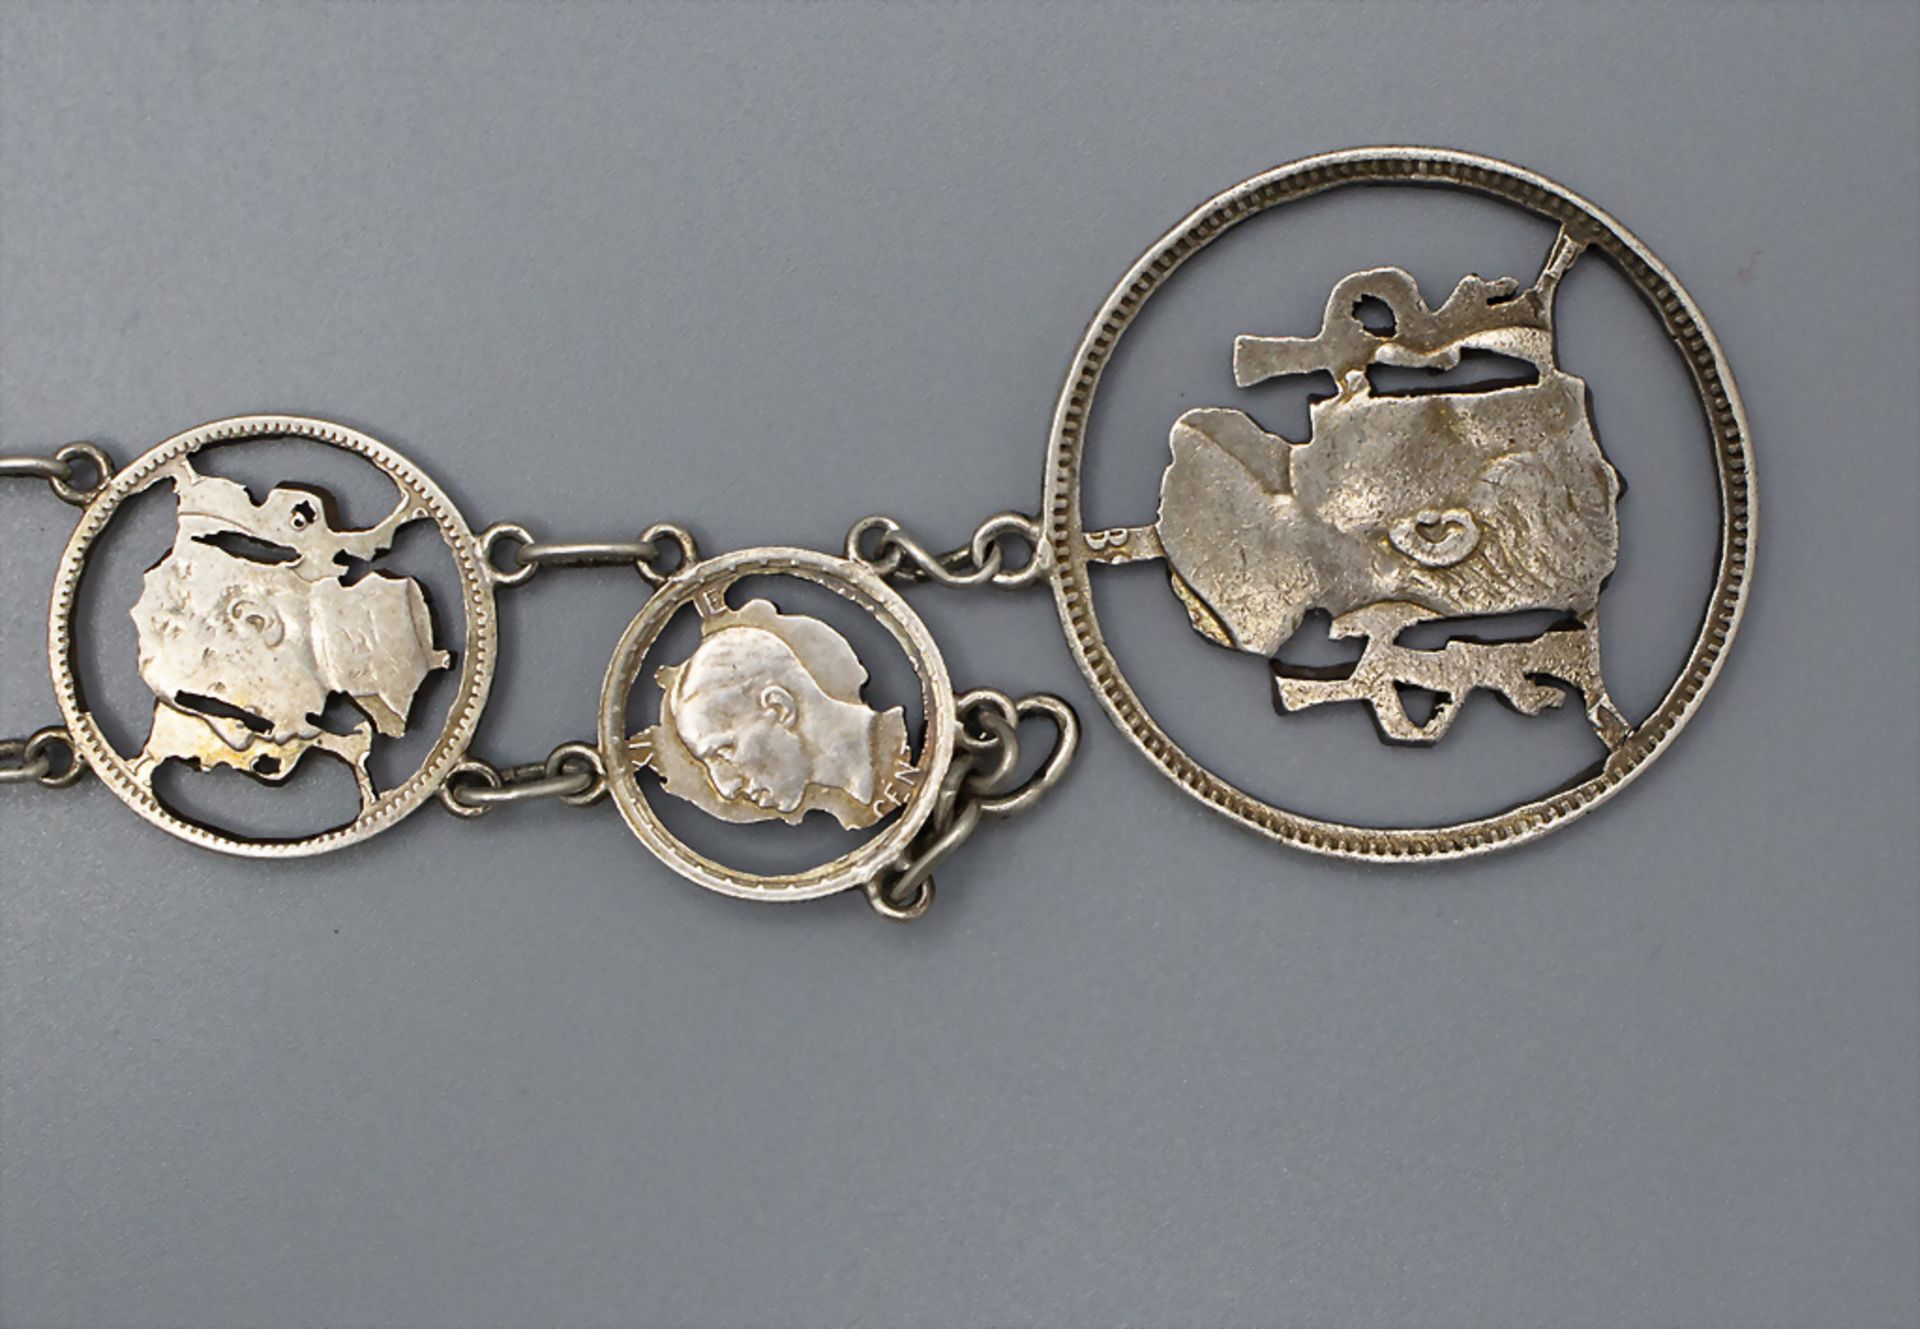 Silber Chatelaine / A silver chatelaine, Spanien, 19. Jh. - Image 4 of 5